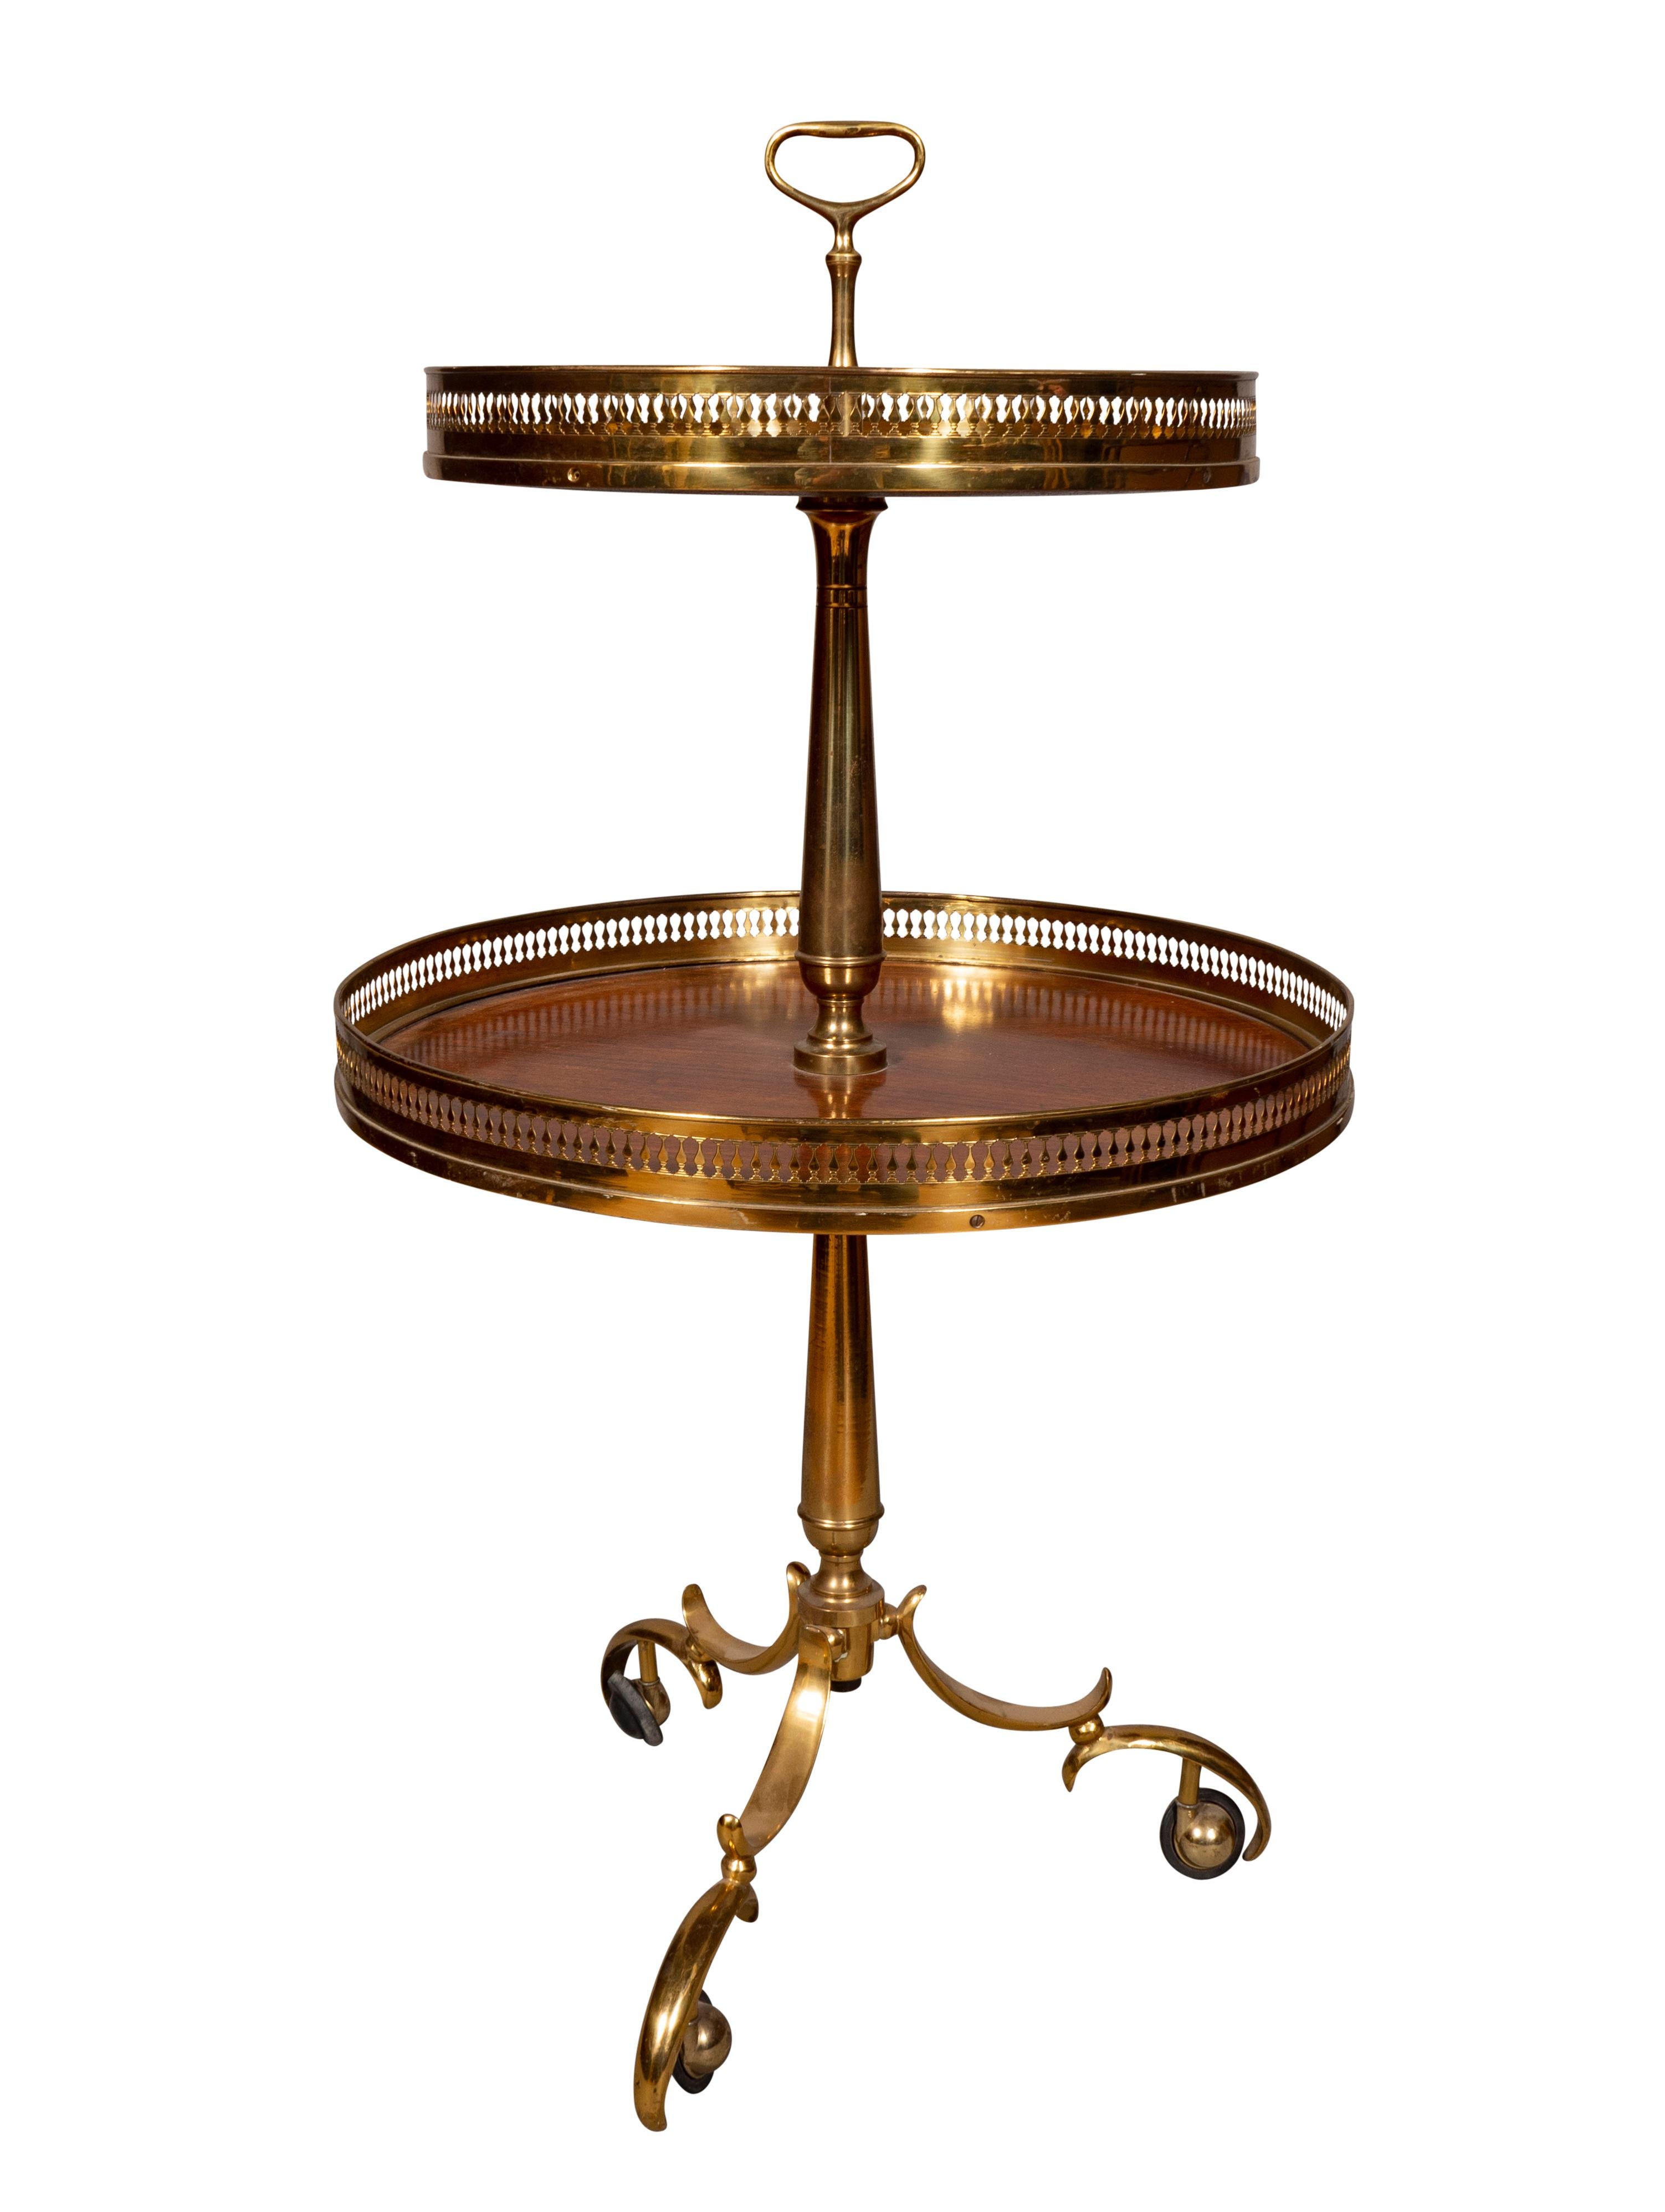 With handle finial over two tiers with brass galleries and raised on a brass tripartite base with scroll legs.